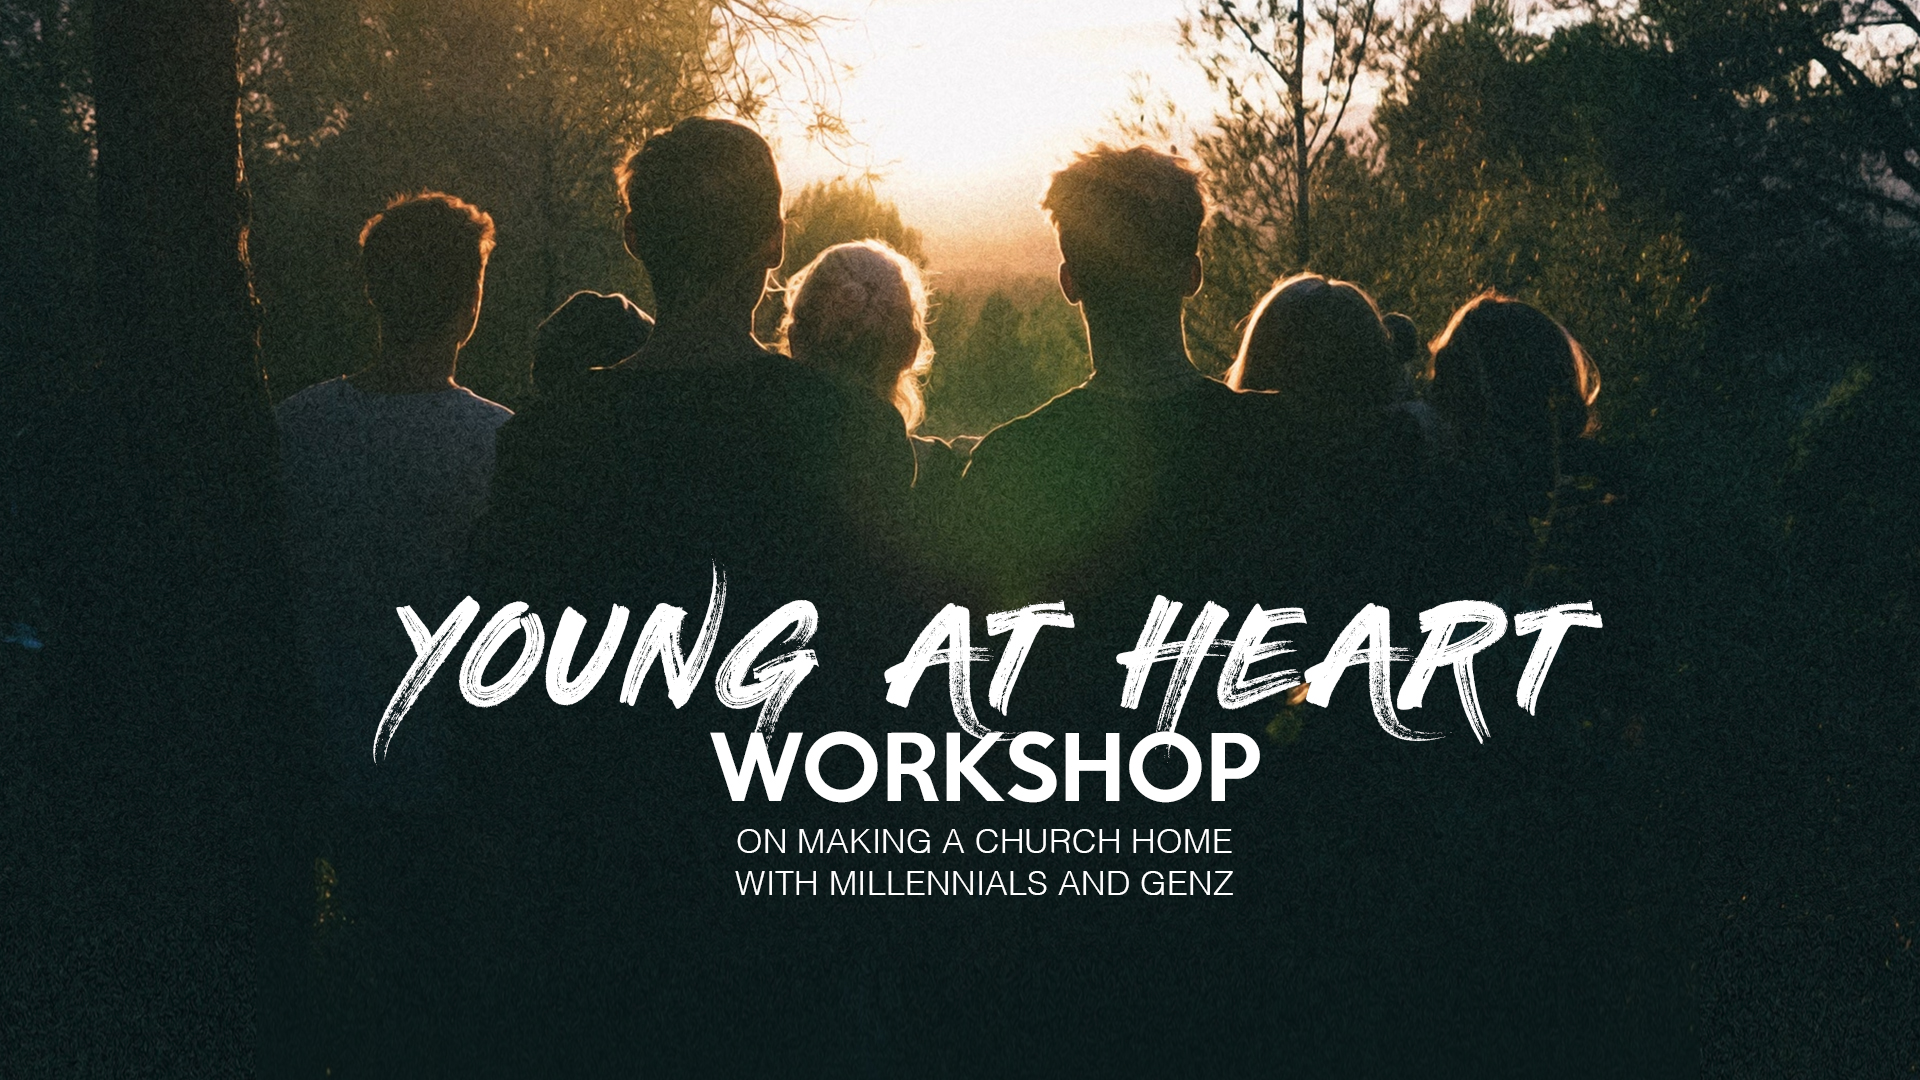 Young At Heart Workshop: On Making a Church Home with Millennials and GenZ